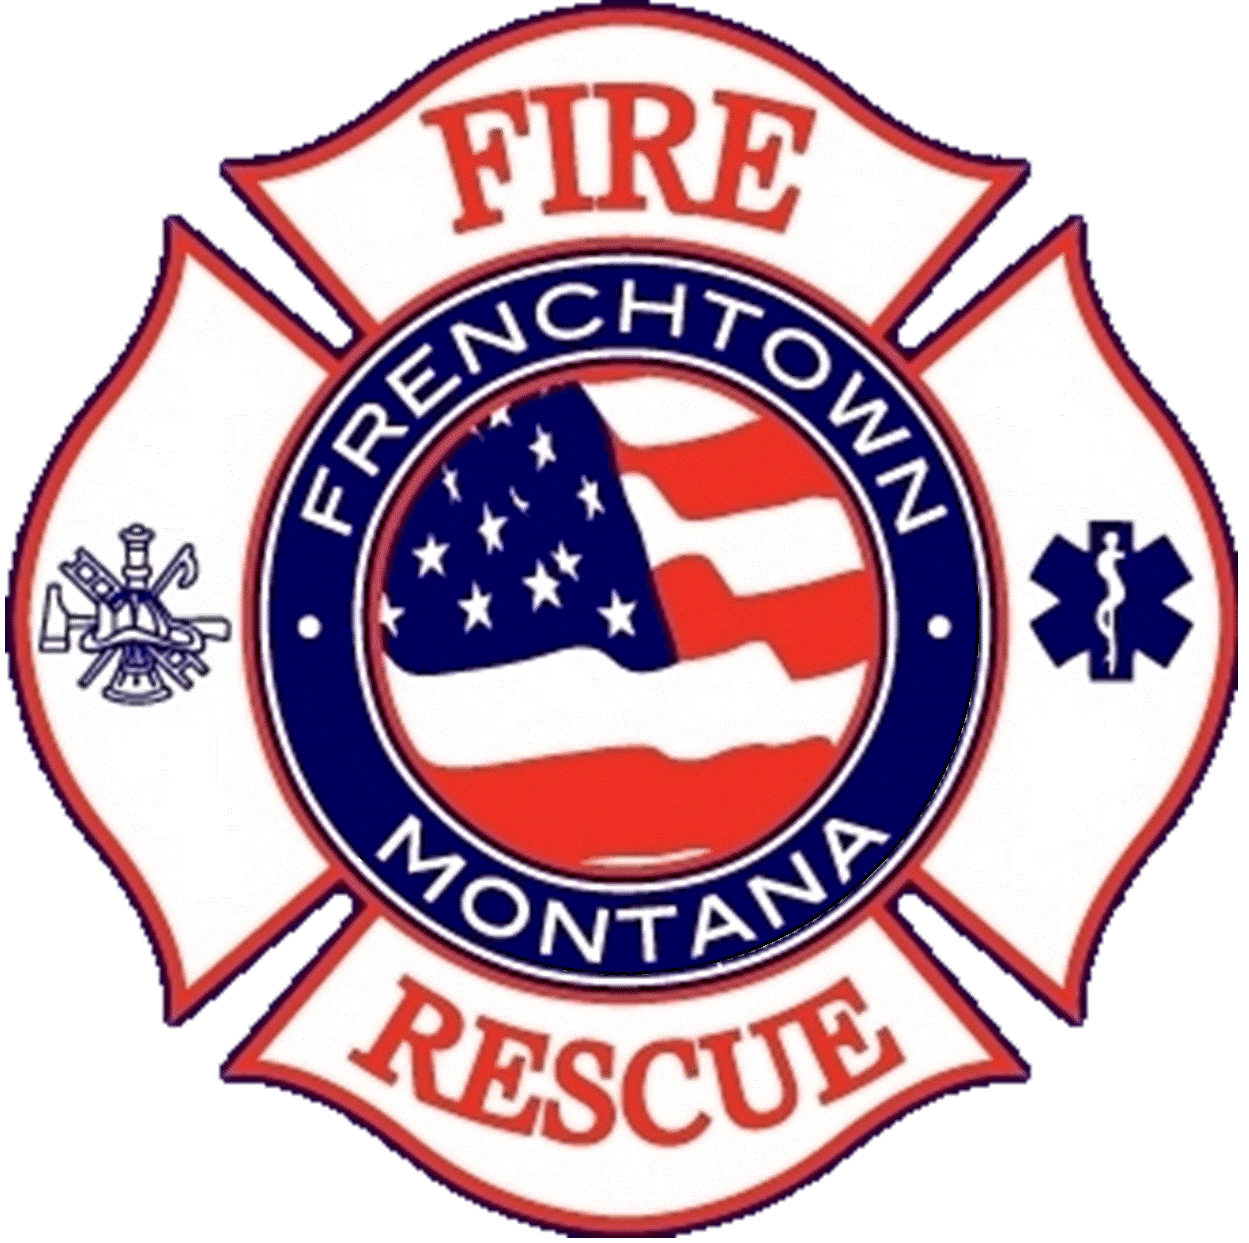 Frenchtown Rural Fire Department